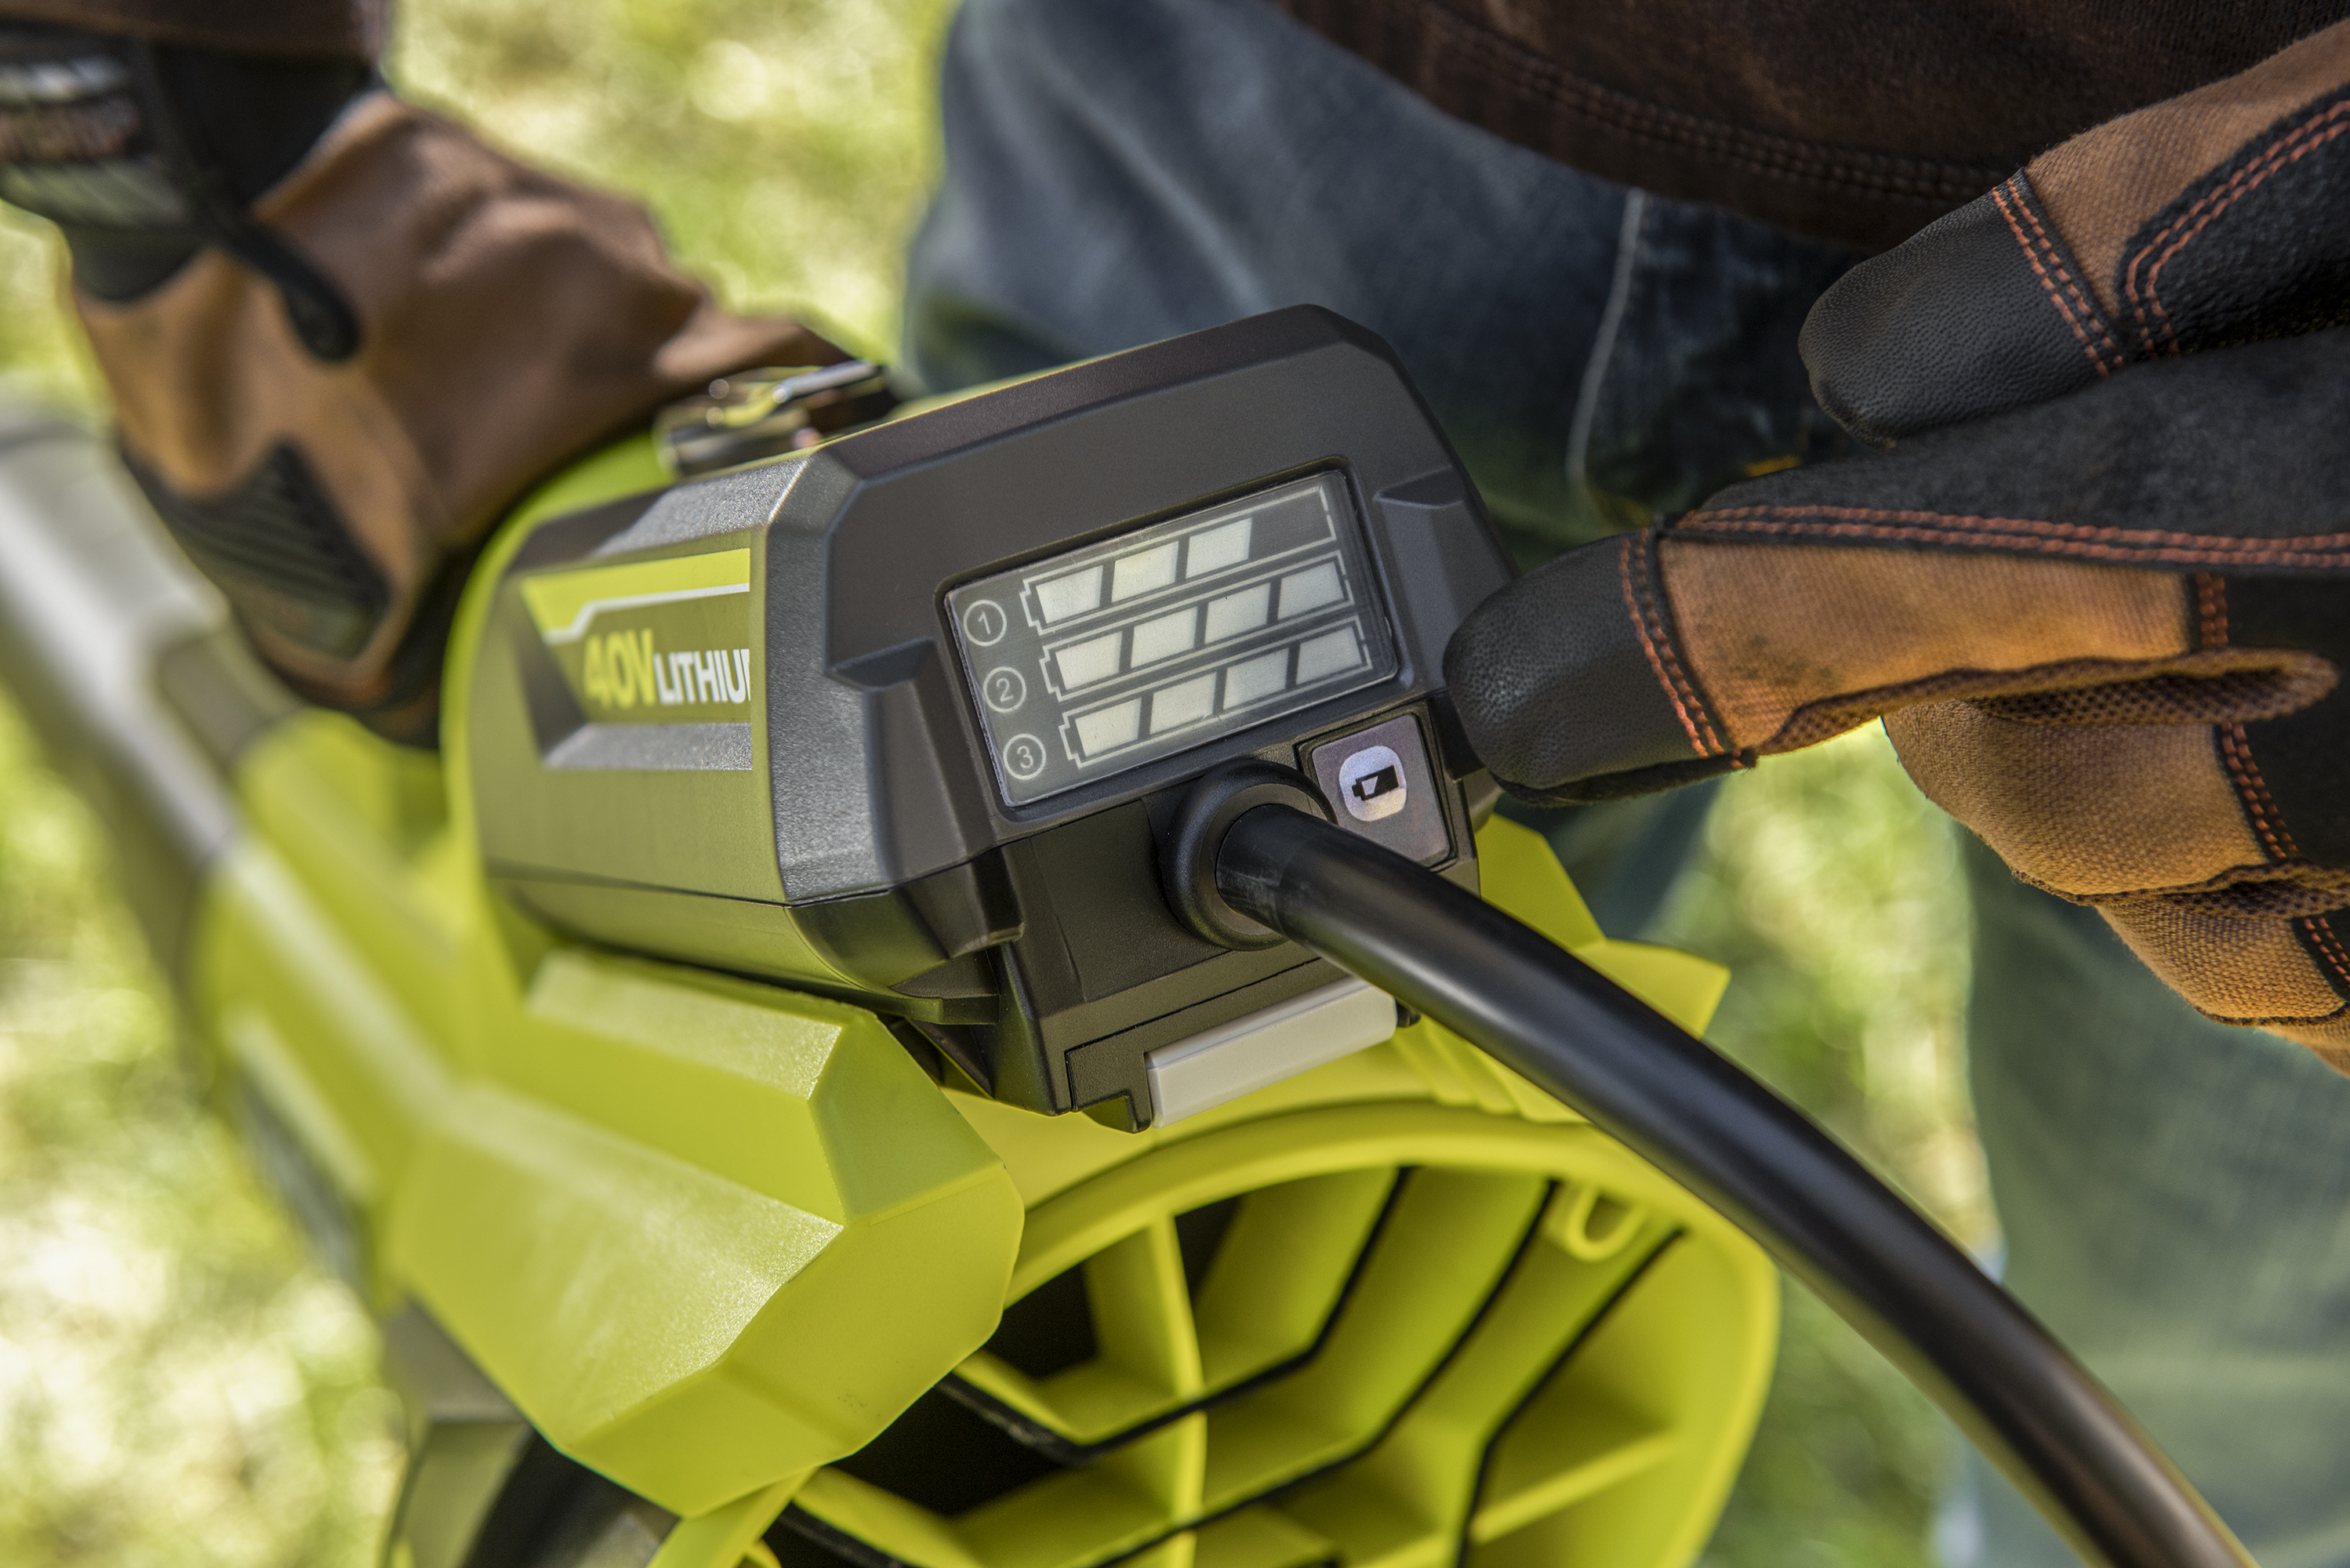 Photo: Connects to Other Select RYOBI 40V Handheld Tools